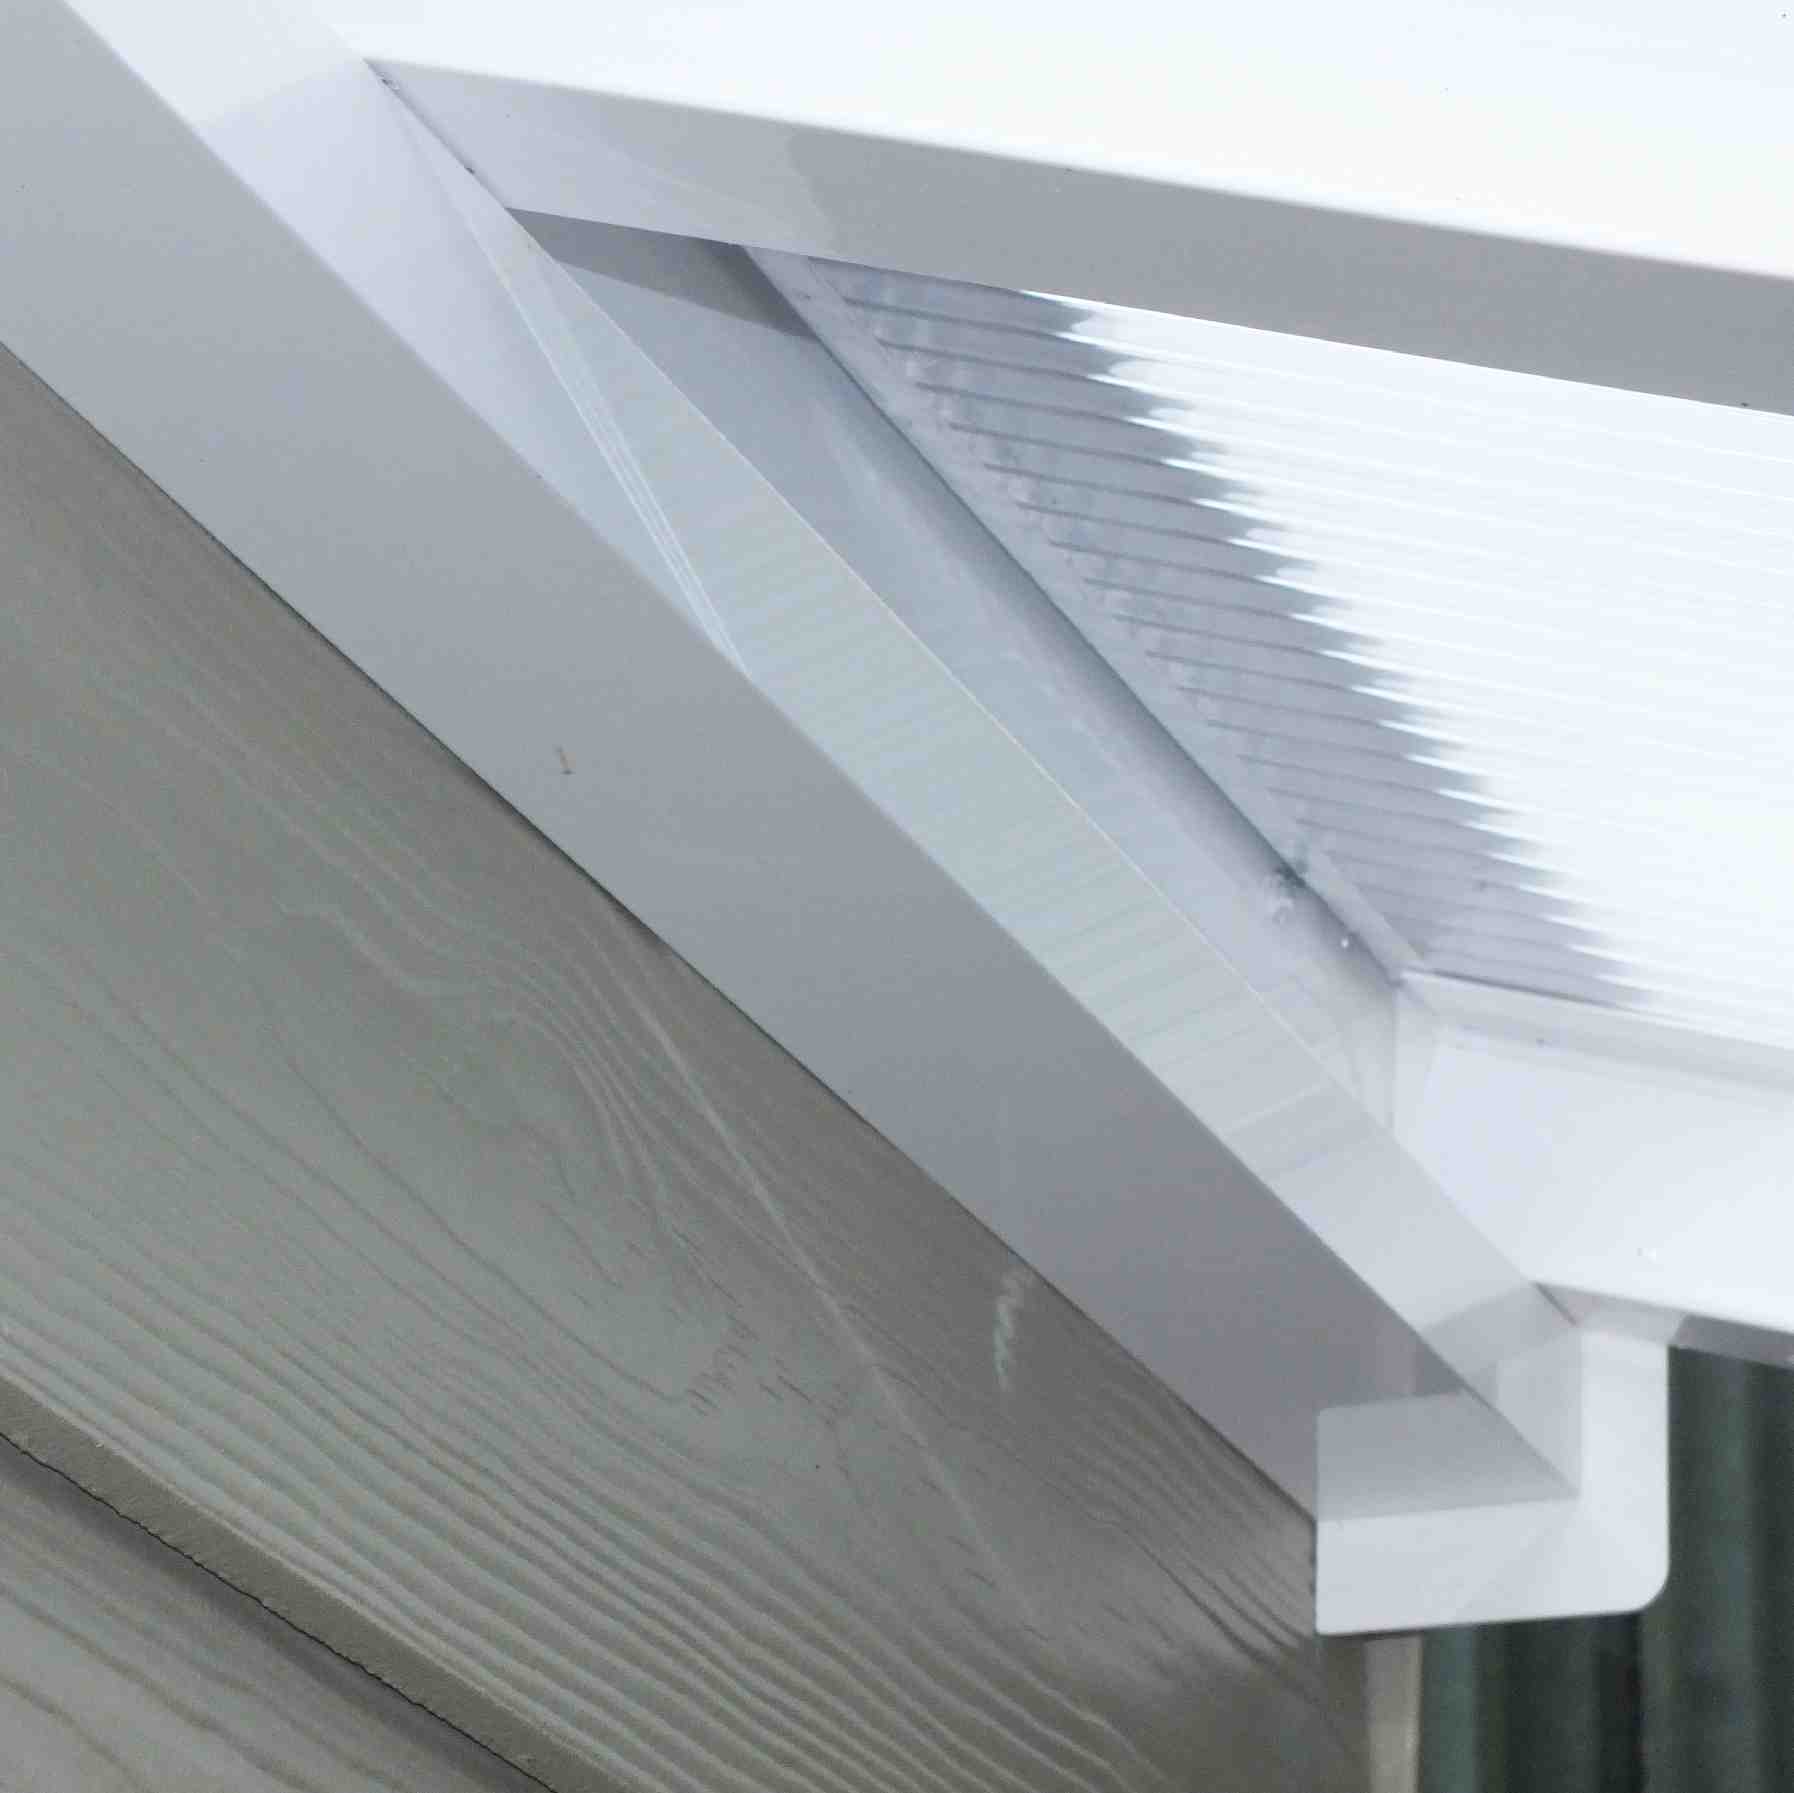 Great deals on Omega Verandah White with 16mm Polycarbonate Glazing - 12.0m (W) x 1.5m (P), (5) Supporting Posts